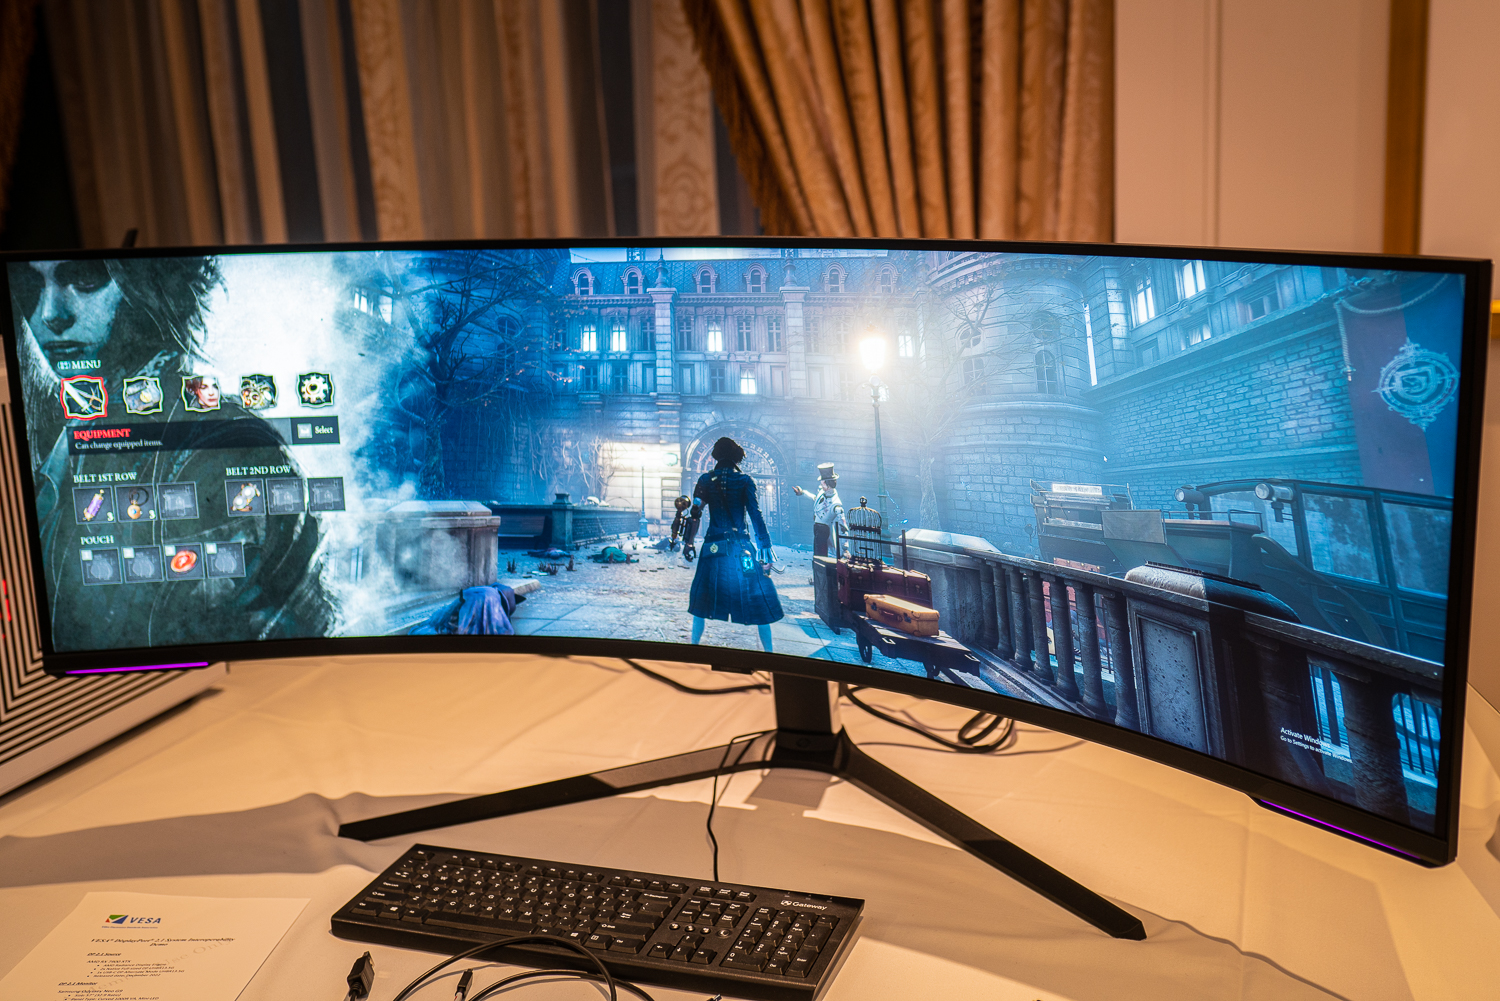 Samsung's Odyssey OLED G9 gaming monitor gets a $500 discount